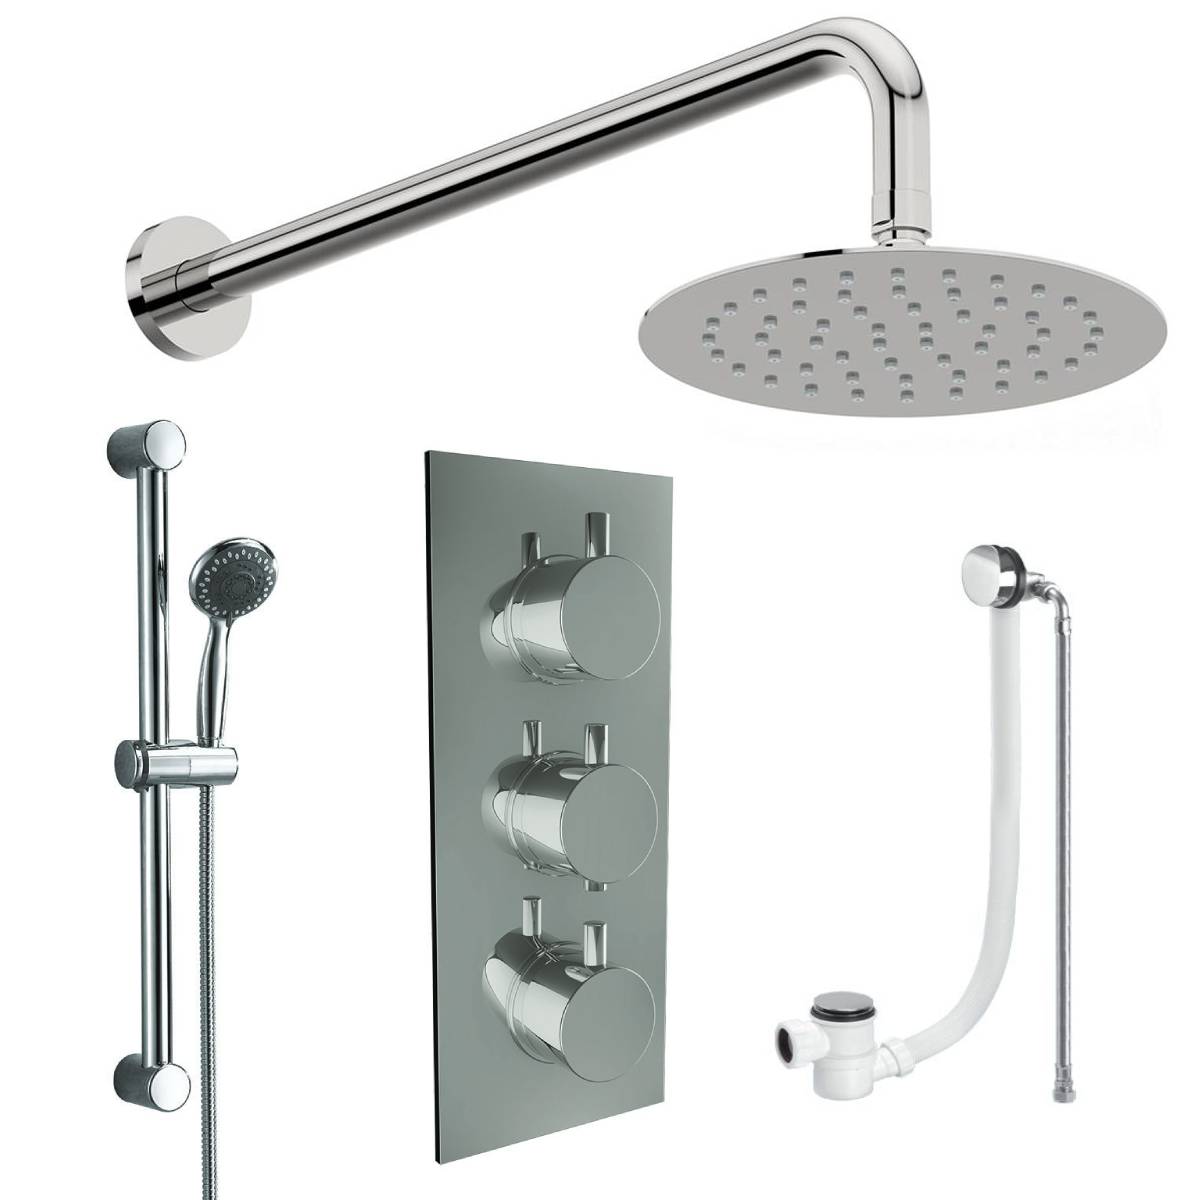 Round Triple Thermostatic Concealed Mixer Shower Kit with Wall Mounted 300mm Shower Head, Slide Rail Kit & Overflow Filler (12473)